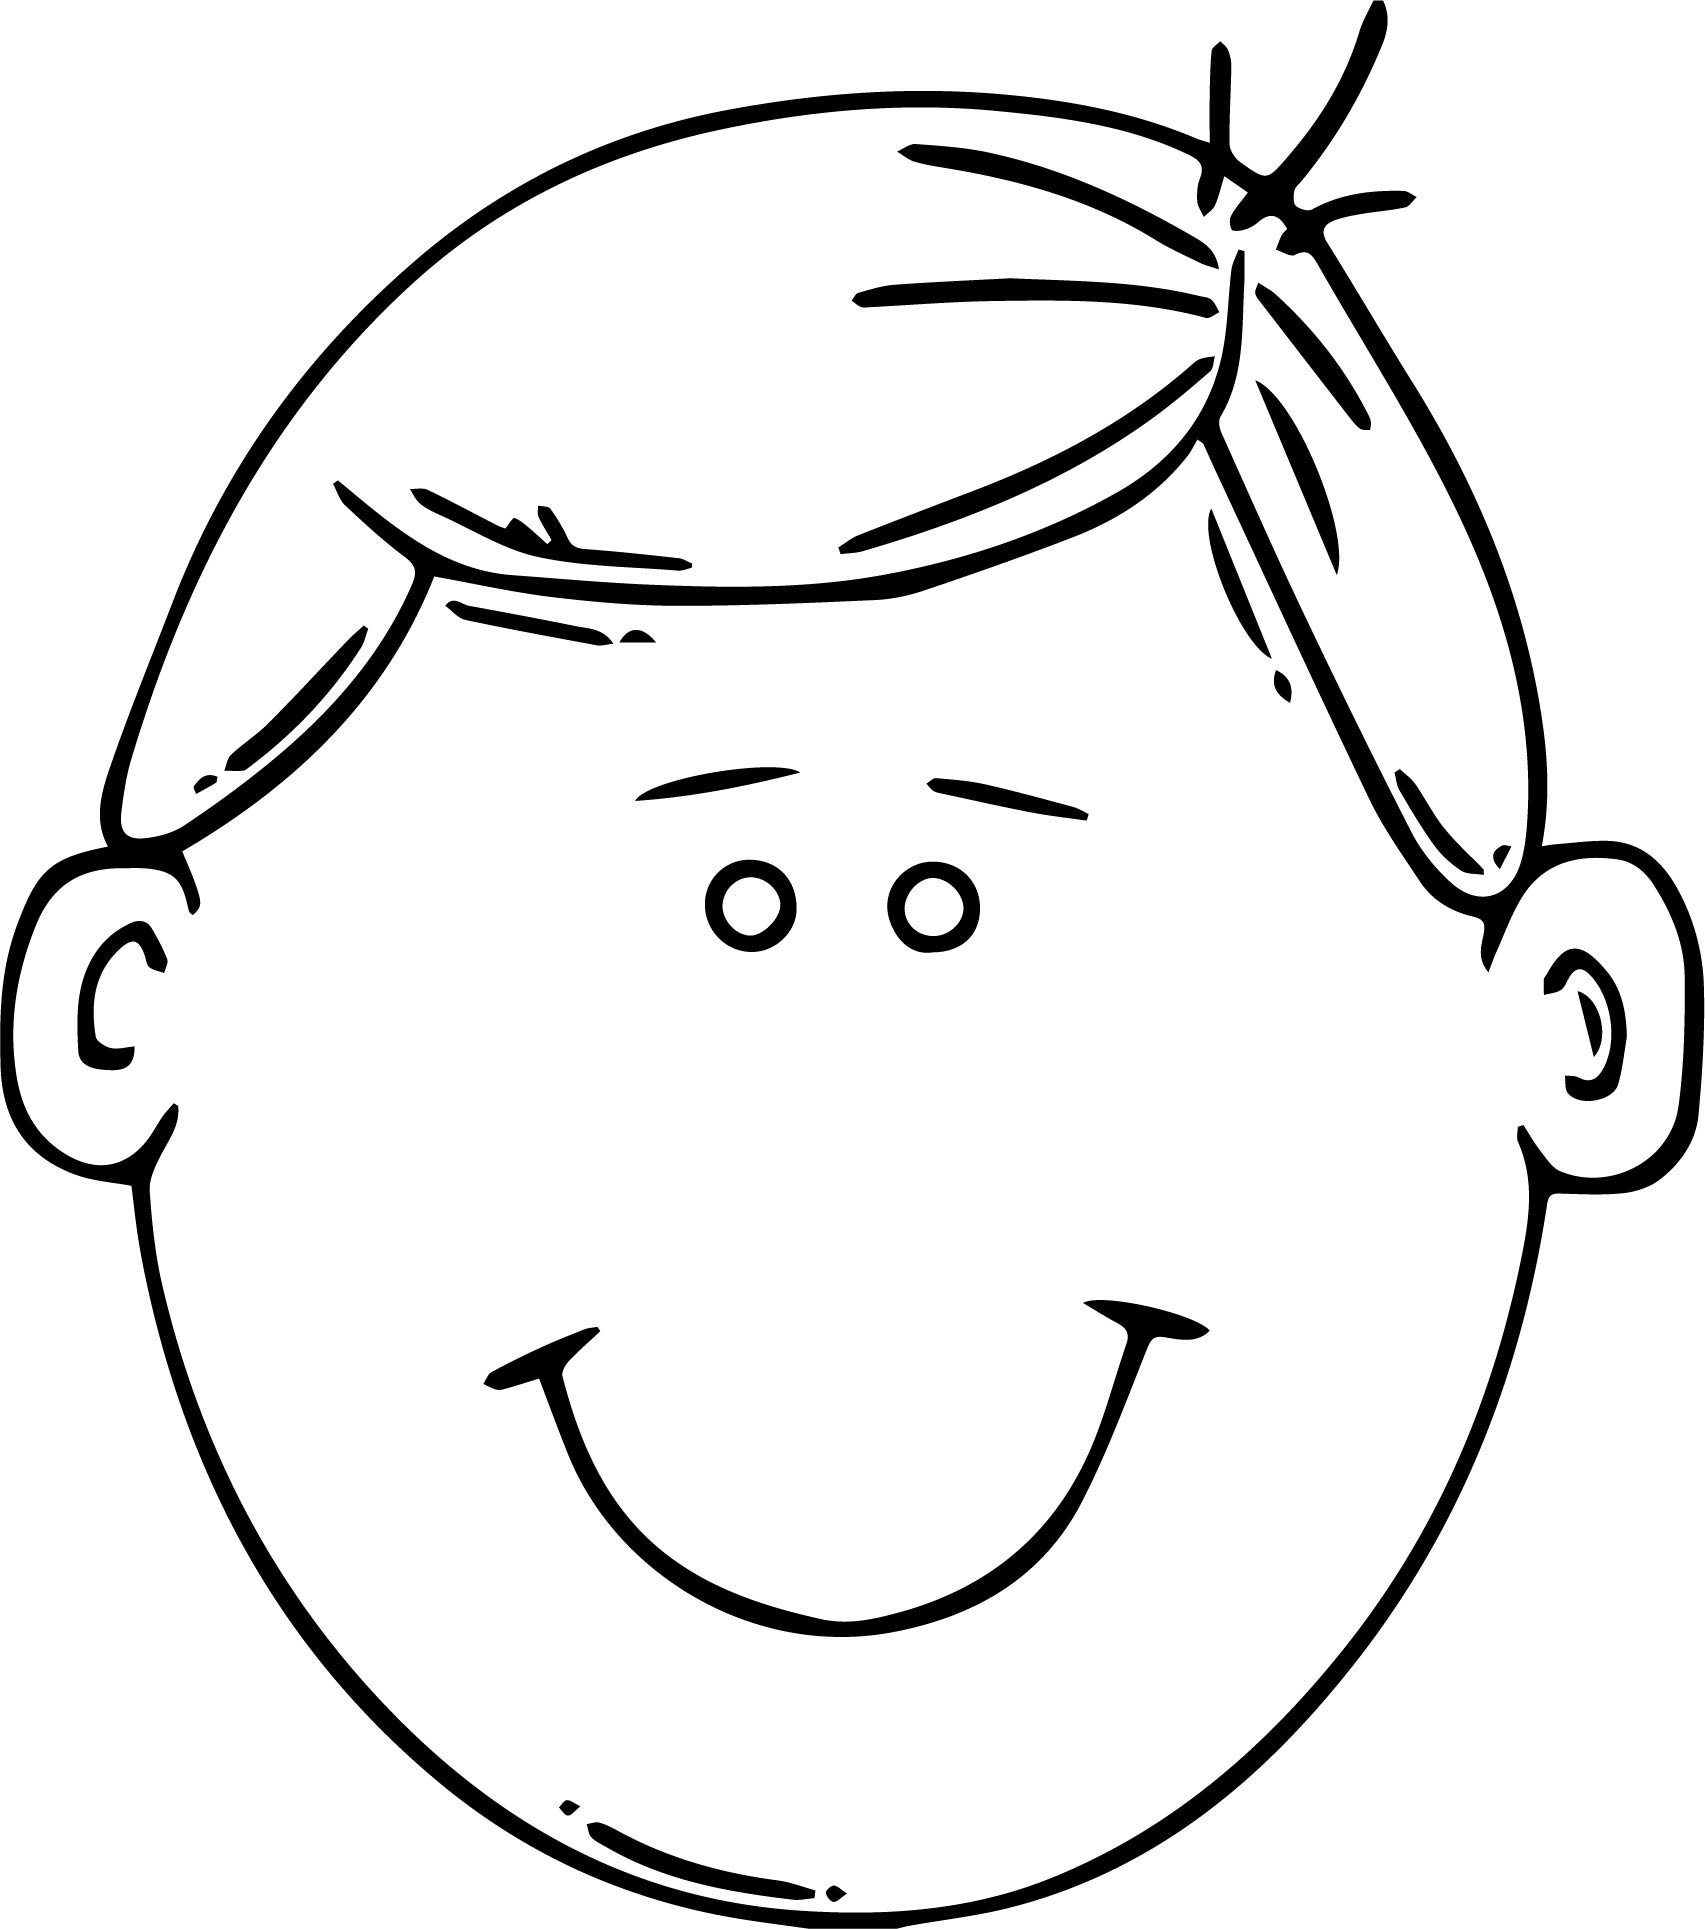 Coloring Pages Of Boys Faces
 Great Boy Face Coloring Page